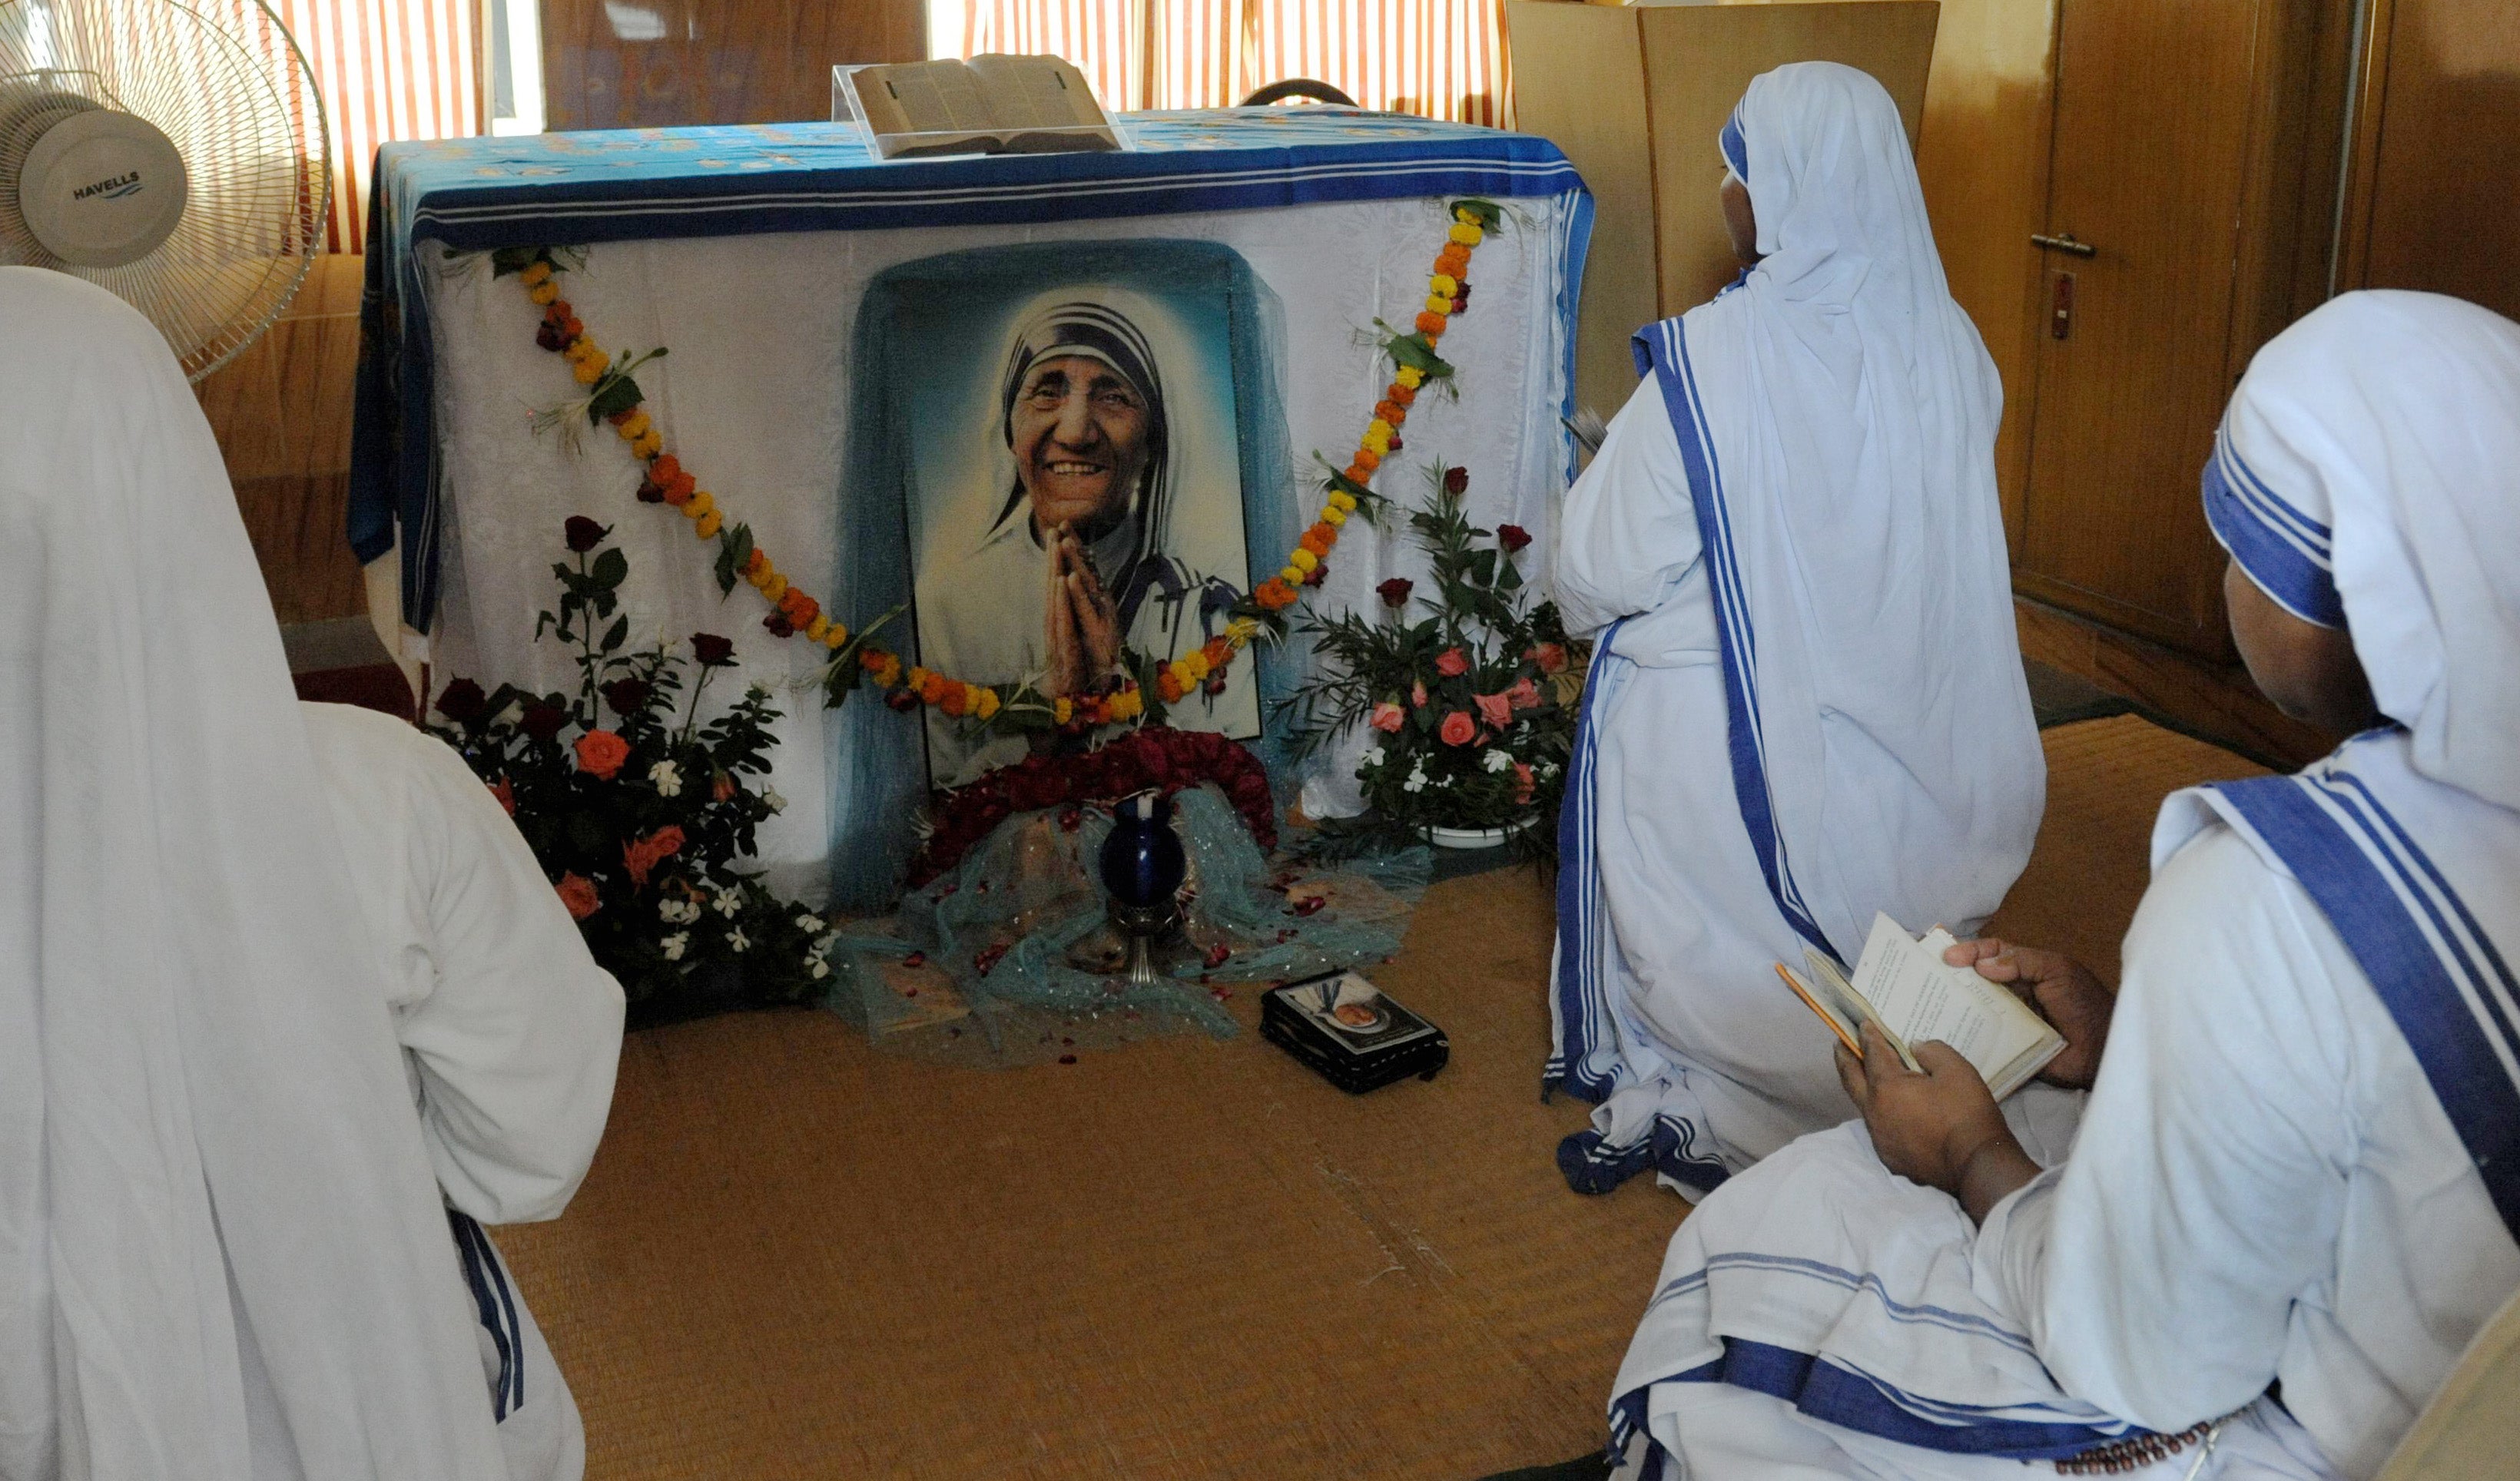 Christian nuns pray in front of a photograph of Mother Teresa as they observe the fifteenth anniversary of her death